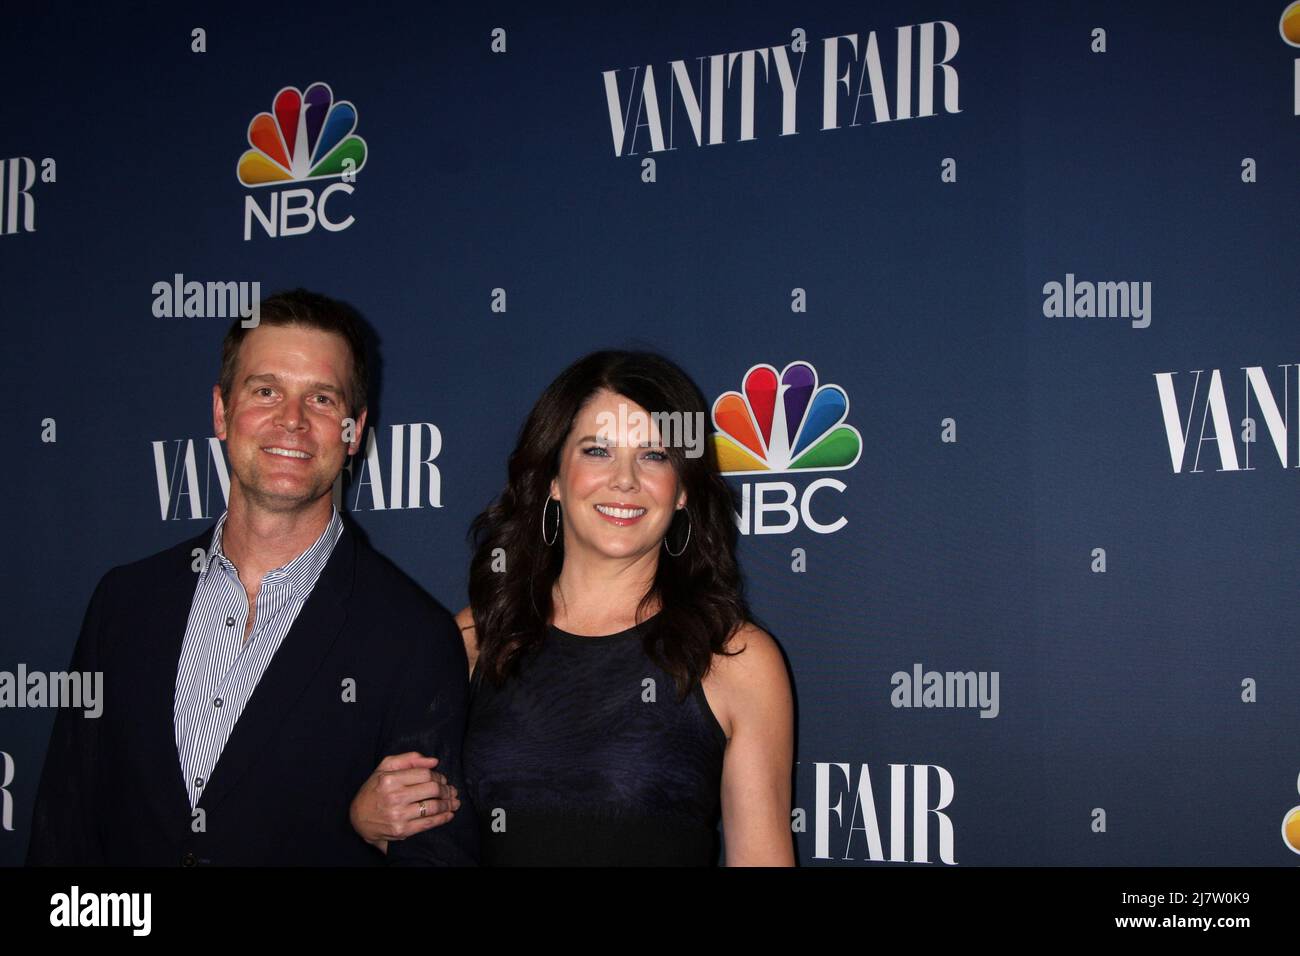 LOS ANGELES - SEP 16:  Peter Krause, Lauren Graham at the NBC & Vanity Fair's 2014-2015 TV Season Event at Hyde Sunset on September 16, 2014 in West Hollywood, CA Stock Photo